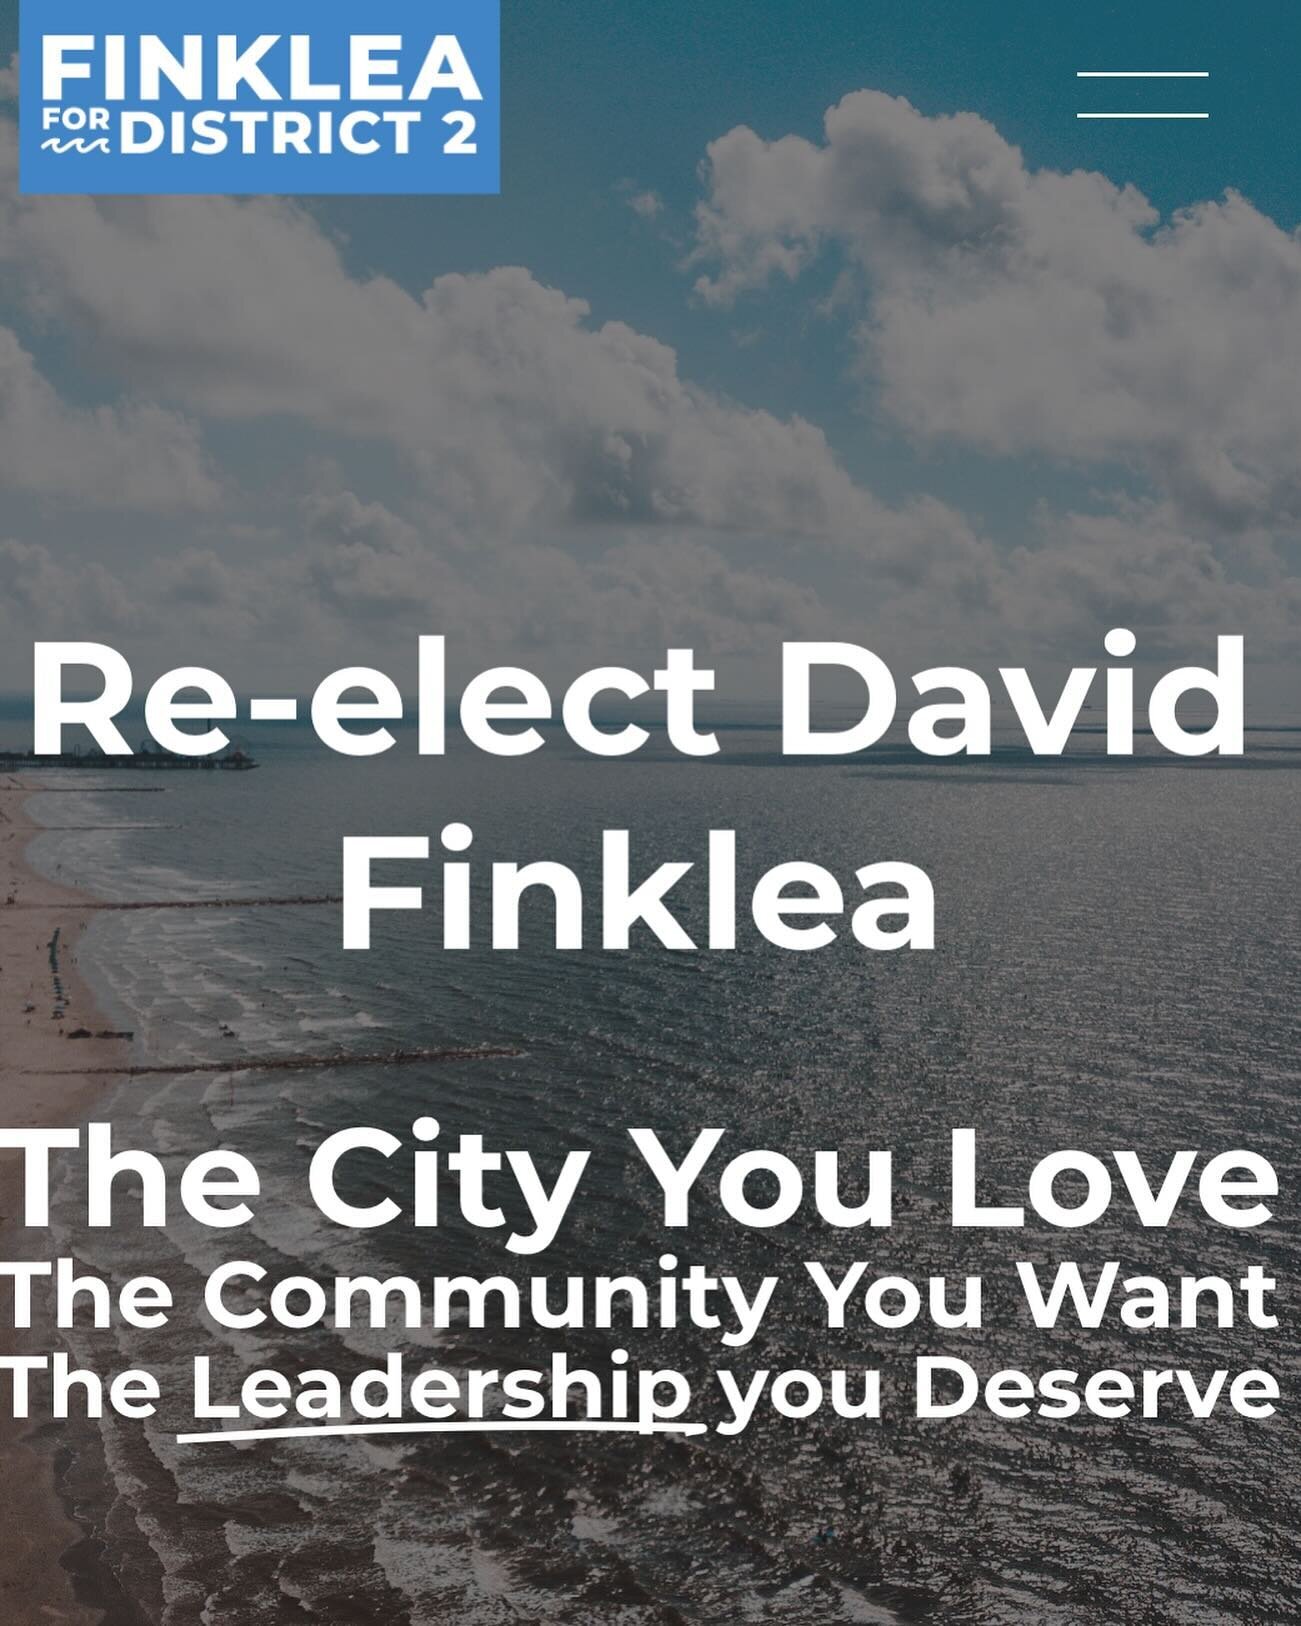 It&rsquo;s official!  I am running for re-election as your City of Galveston Councilmember in District 2.  Election is May 4.  Follow for more updates about issues and actions.  Sign up for notices at www.finkleaforgalveston.com #finkleaforgalveston 